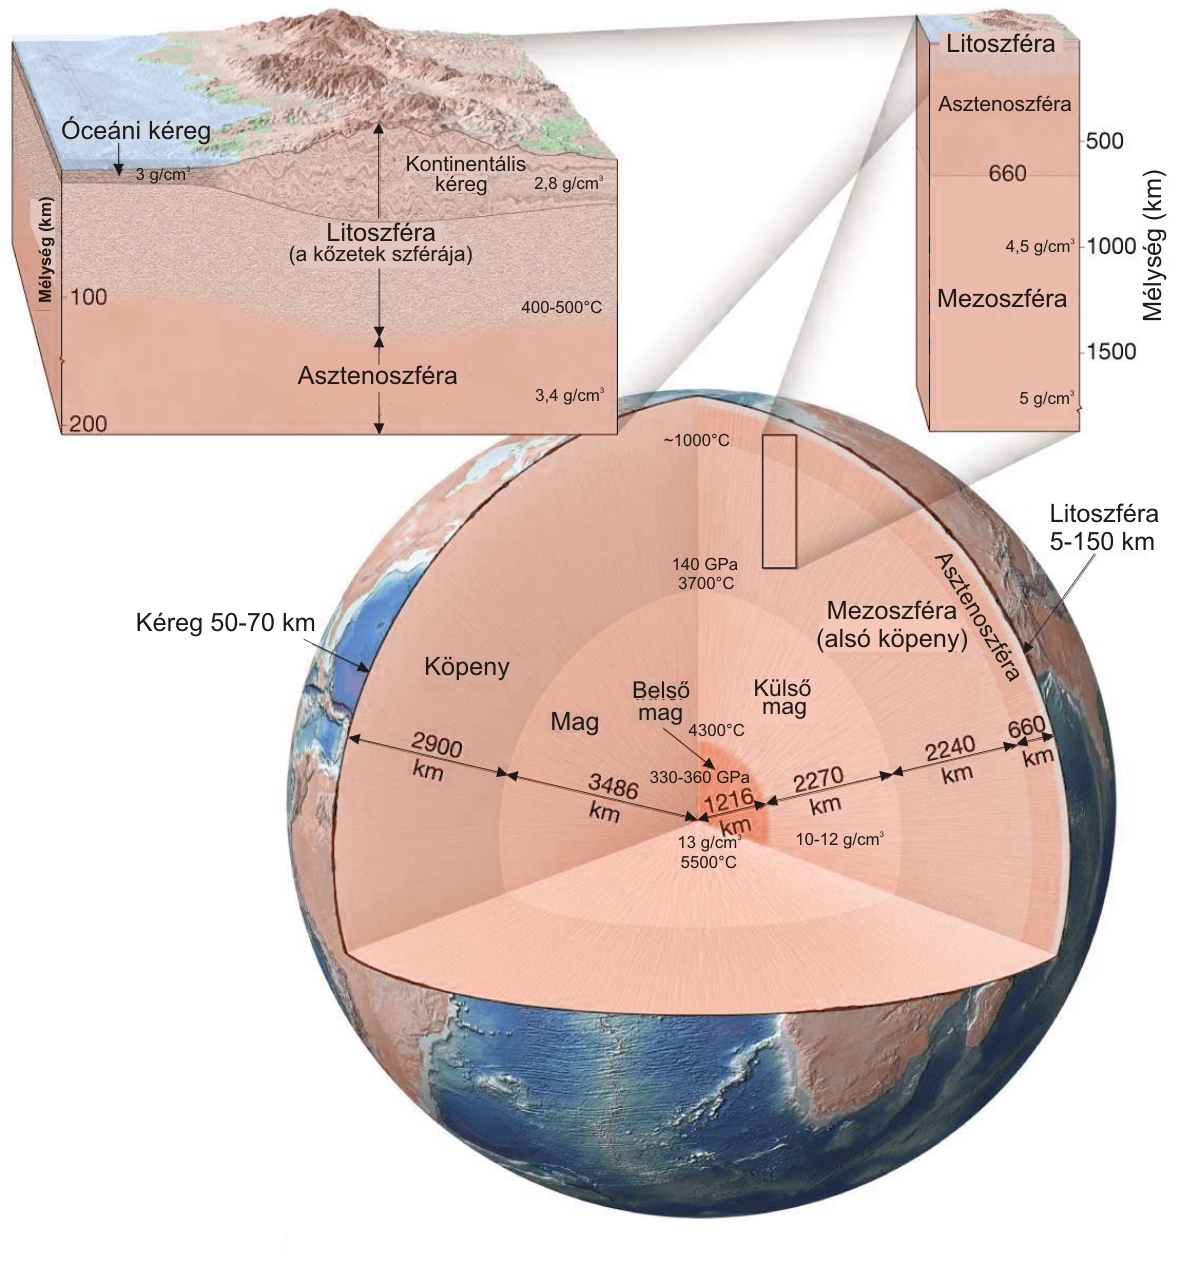 Internal stucture of the Earth